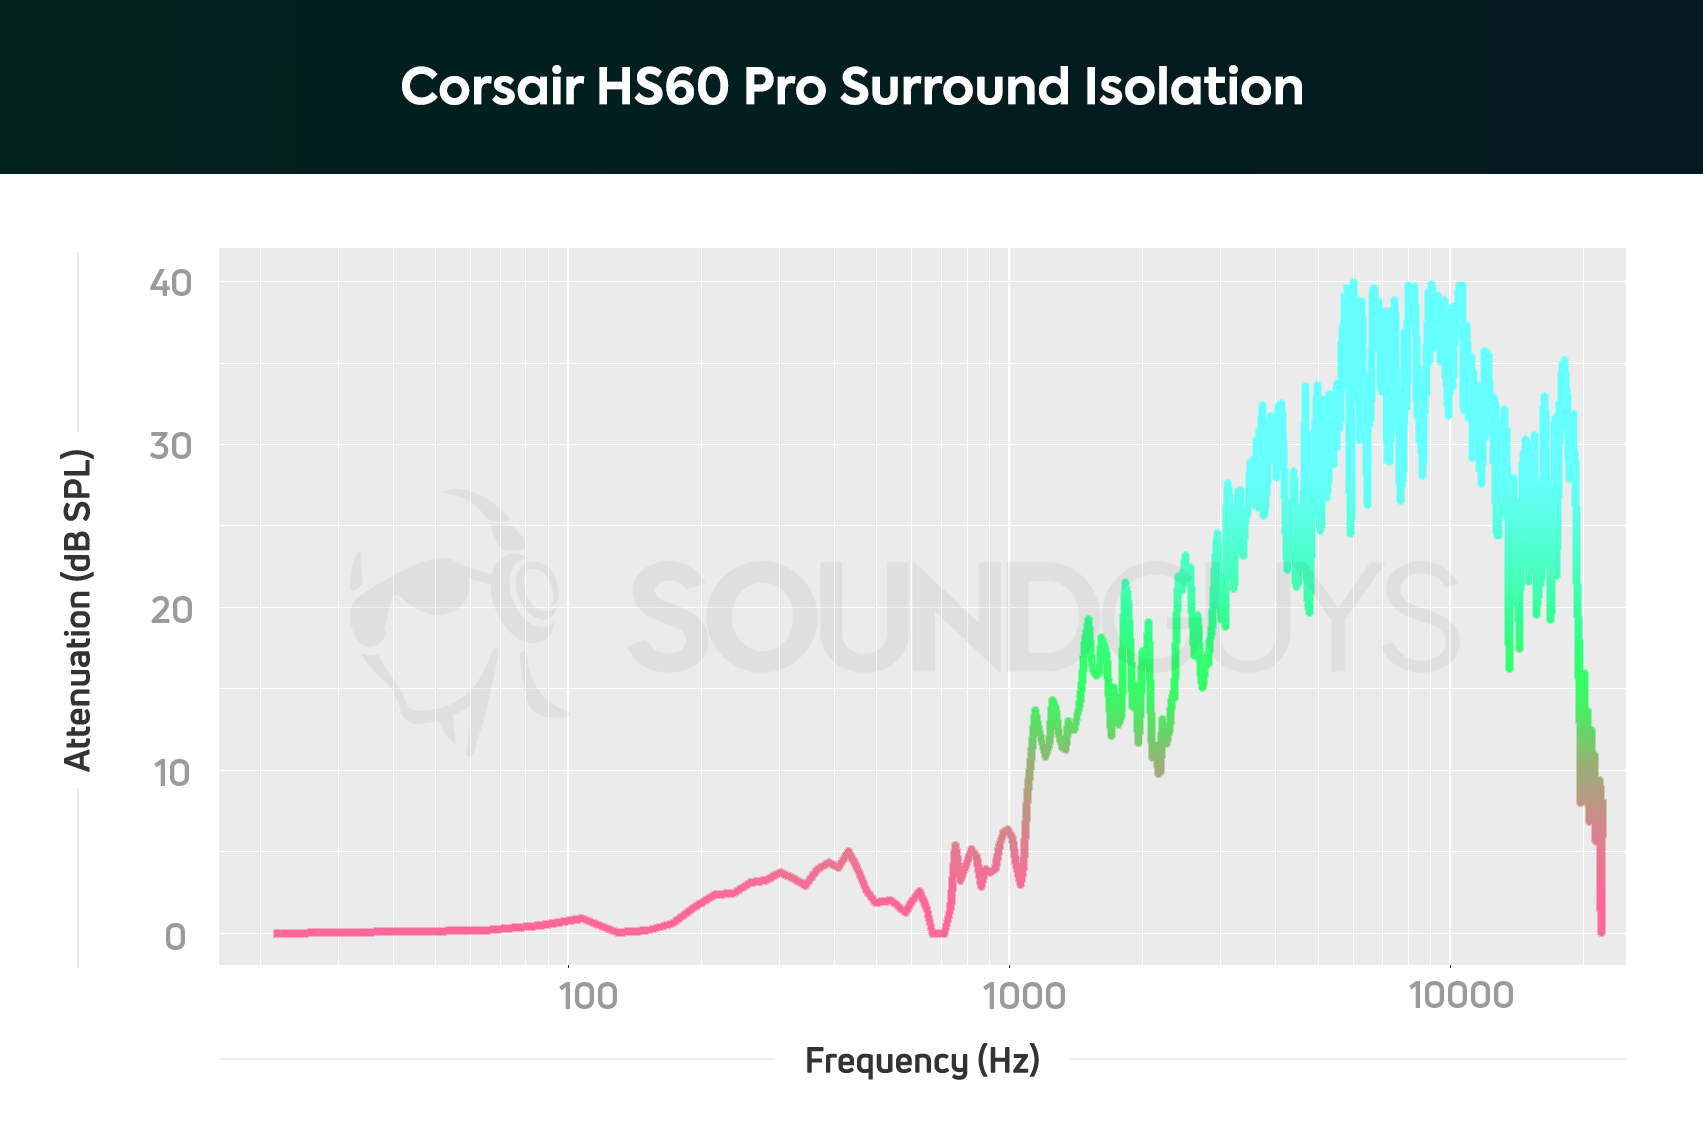 An isolation chart for the Corsair HS60 Pro Surround.